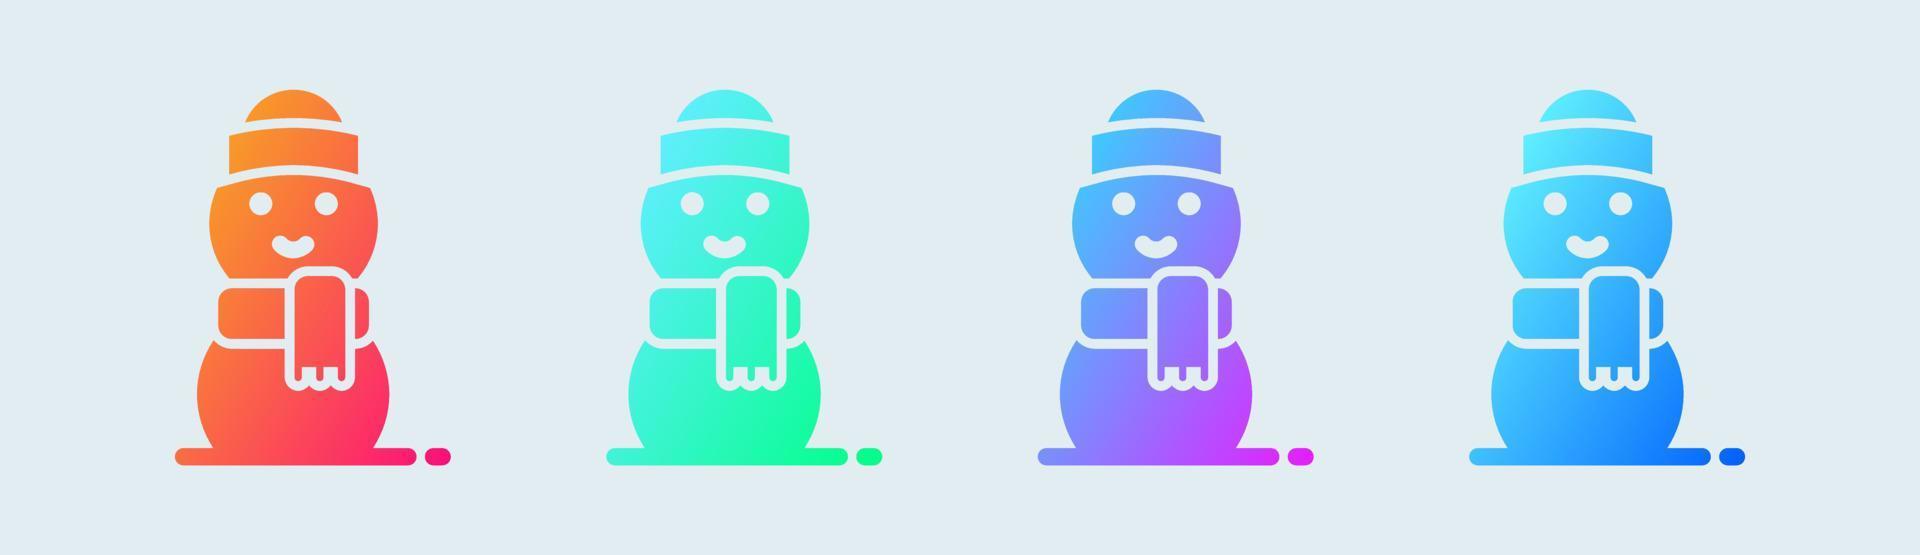 Snowman solid icon in gradient colors. Winter holiday signs vector illustration.